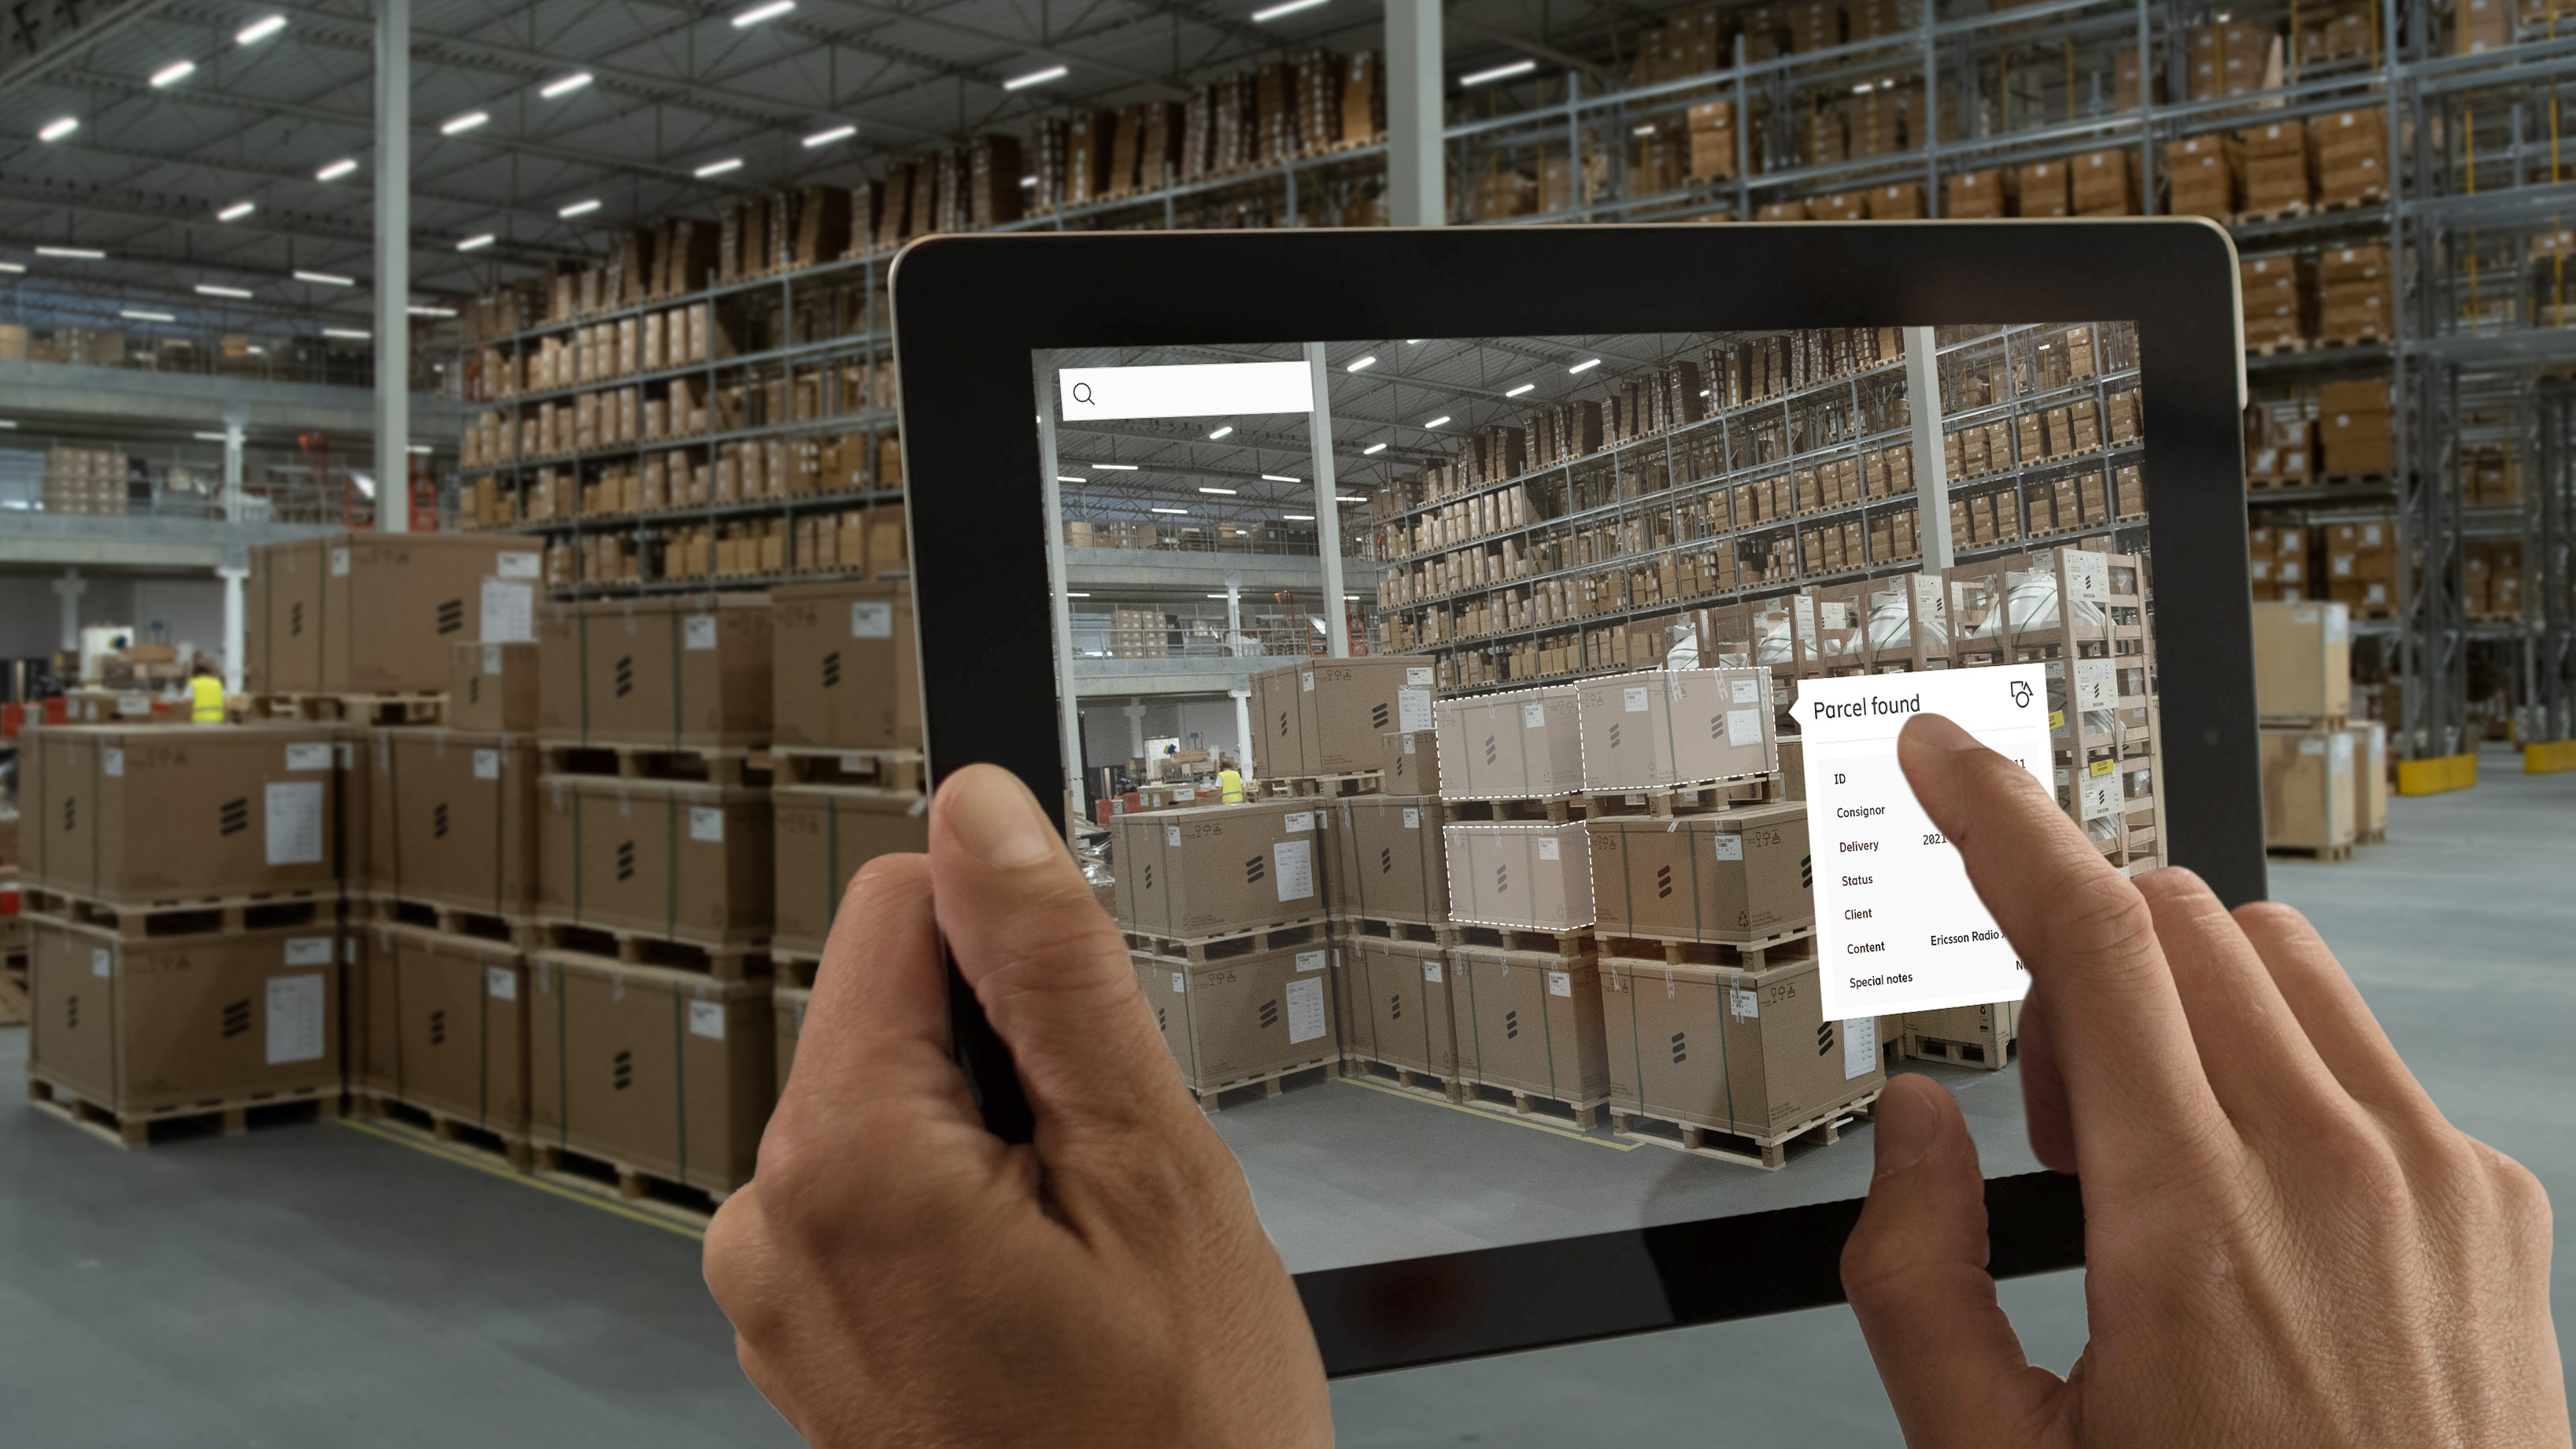 Asset tracking in warehouse using augmented reality (AR)